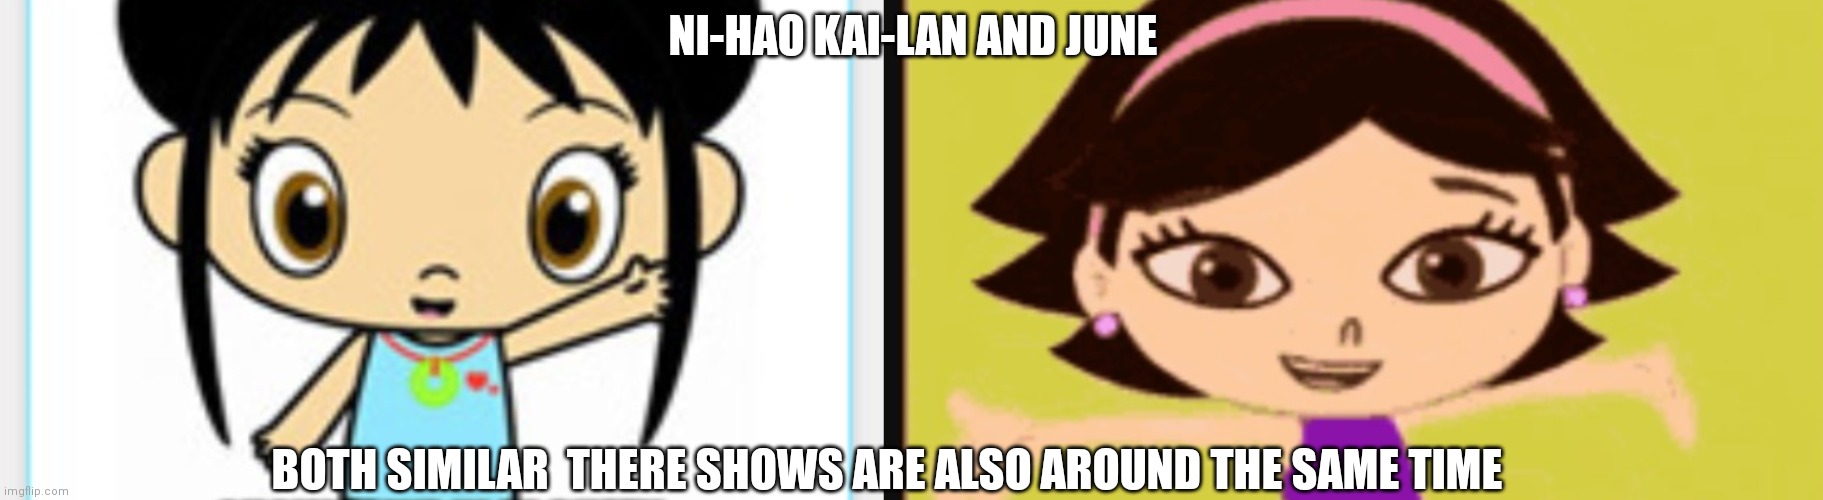 Very similar characters | NI-HAO KAI-LAN AND JUNE; BOTH SIMILAR  THERE SHOWS ARE ALSO AROUND THE SAME TIME | image tagged in funny memes | made w/ Imgflip meme maker